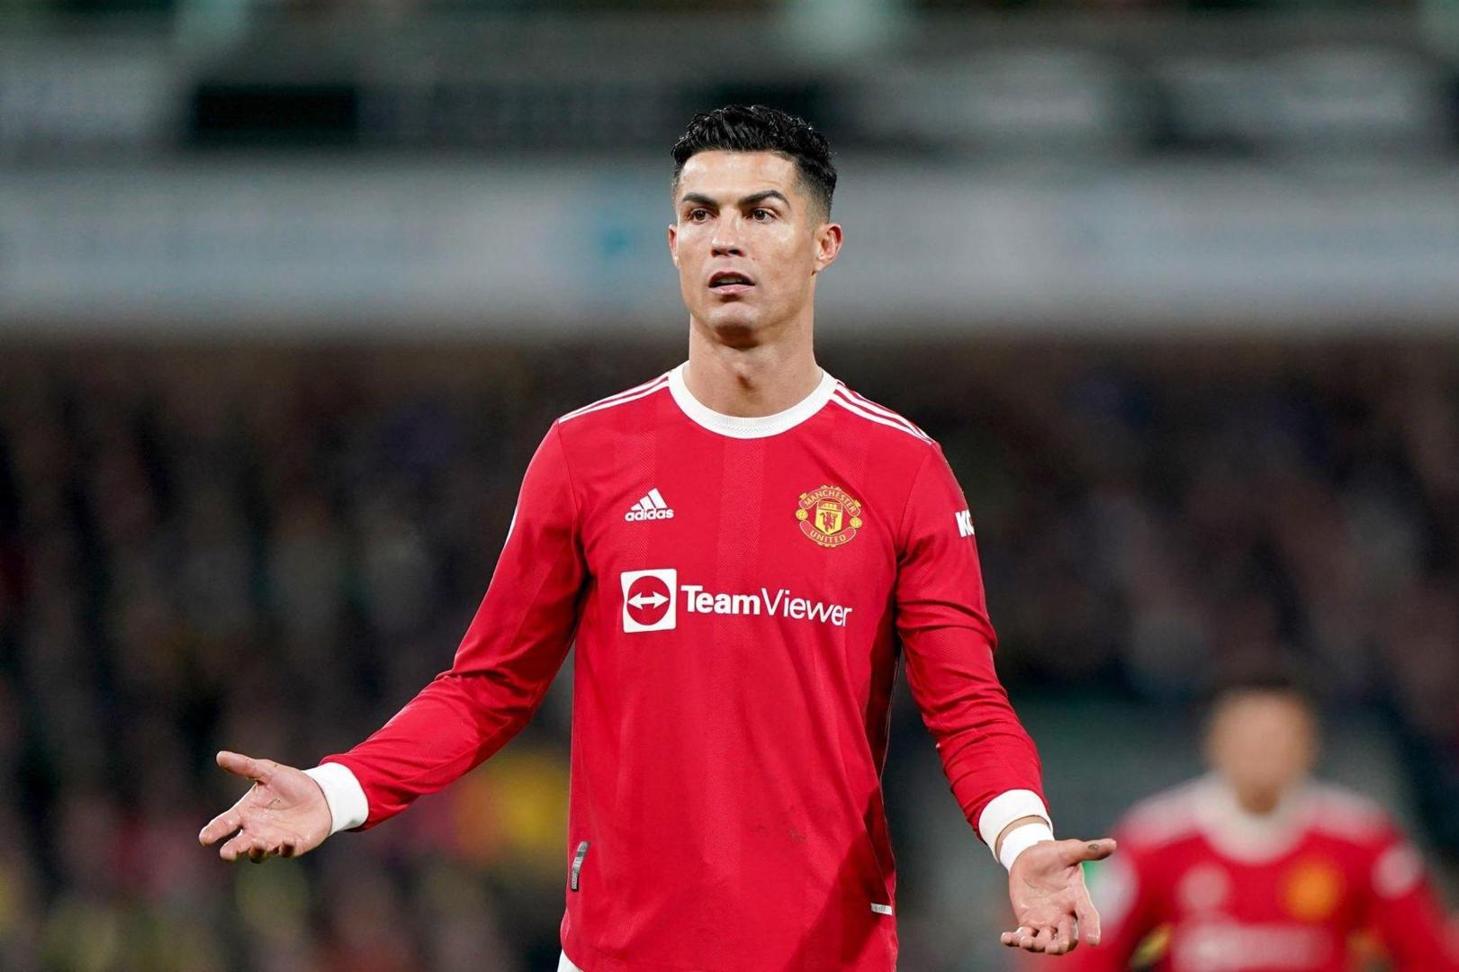 Cristiano Ronaldo Could Reportedly Exit Man Utd With a Move to Barcelona on the Cards